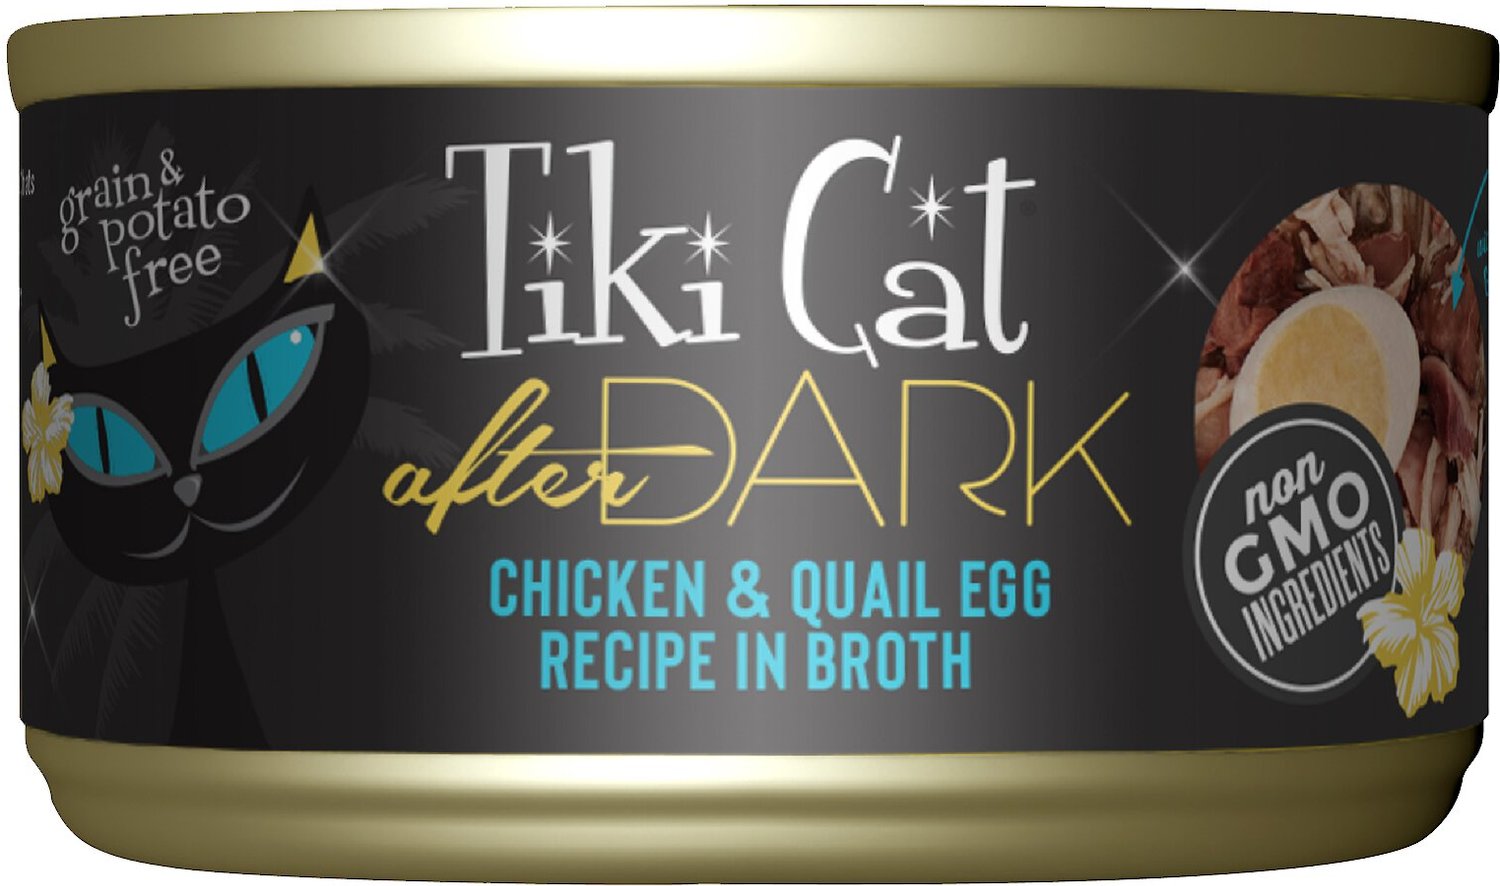 tiki cat canned cat food